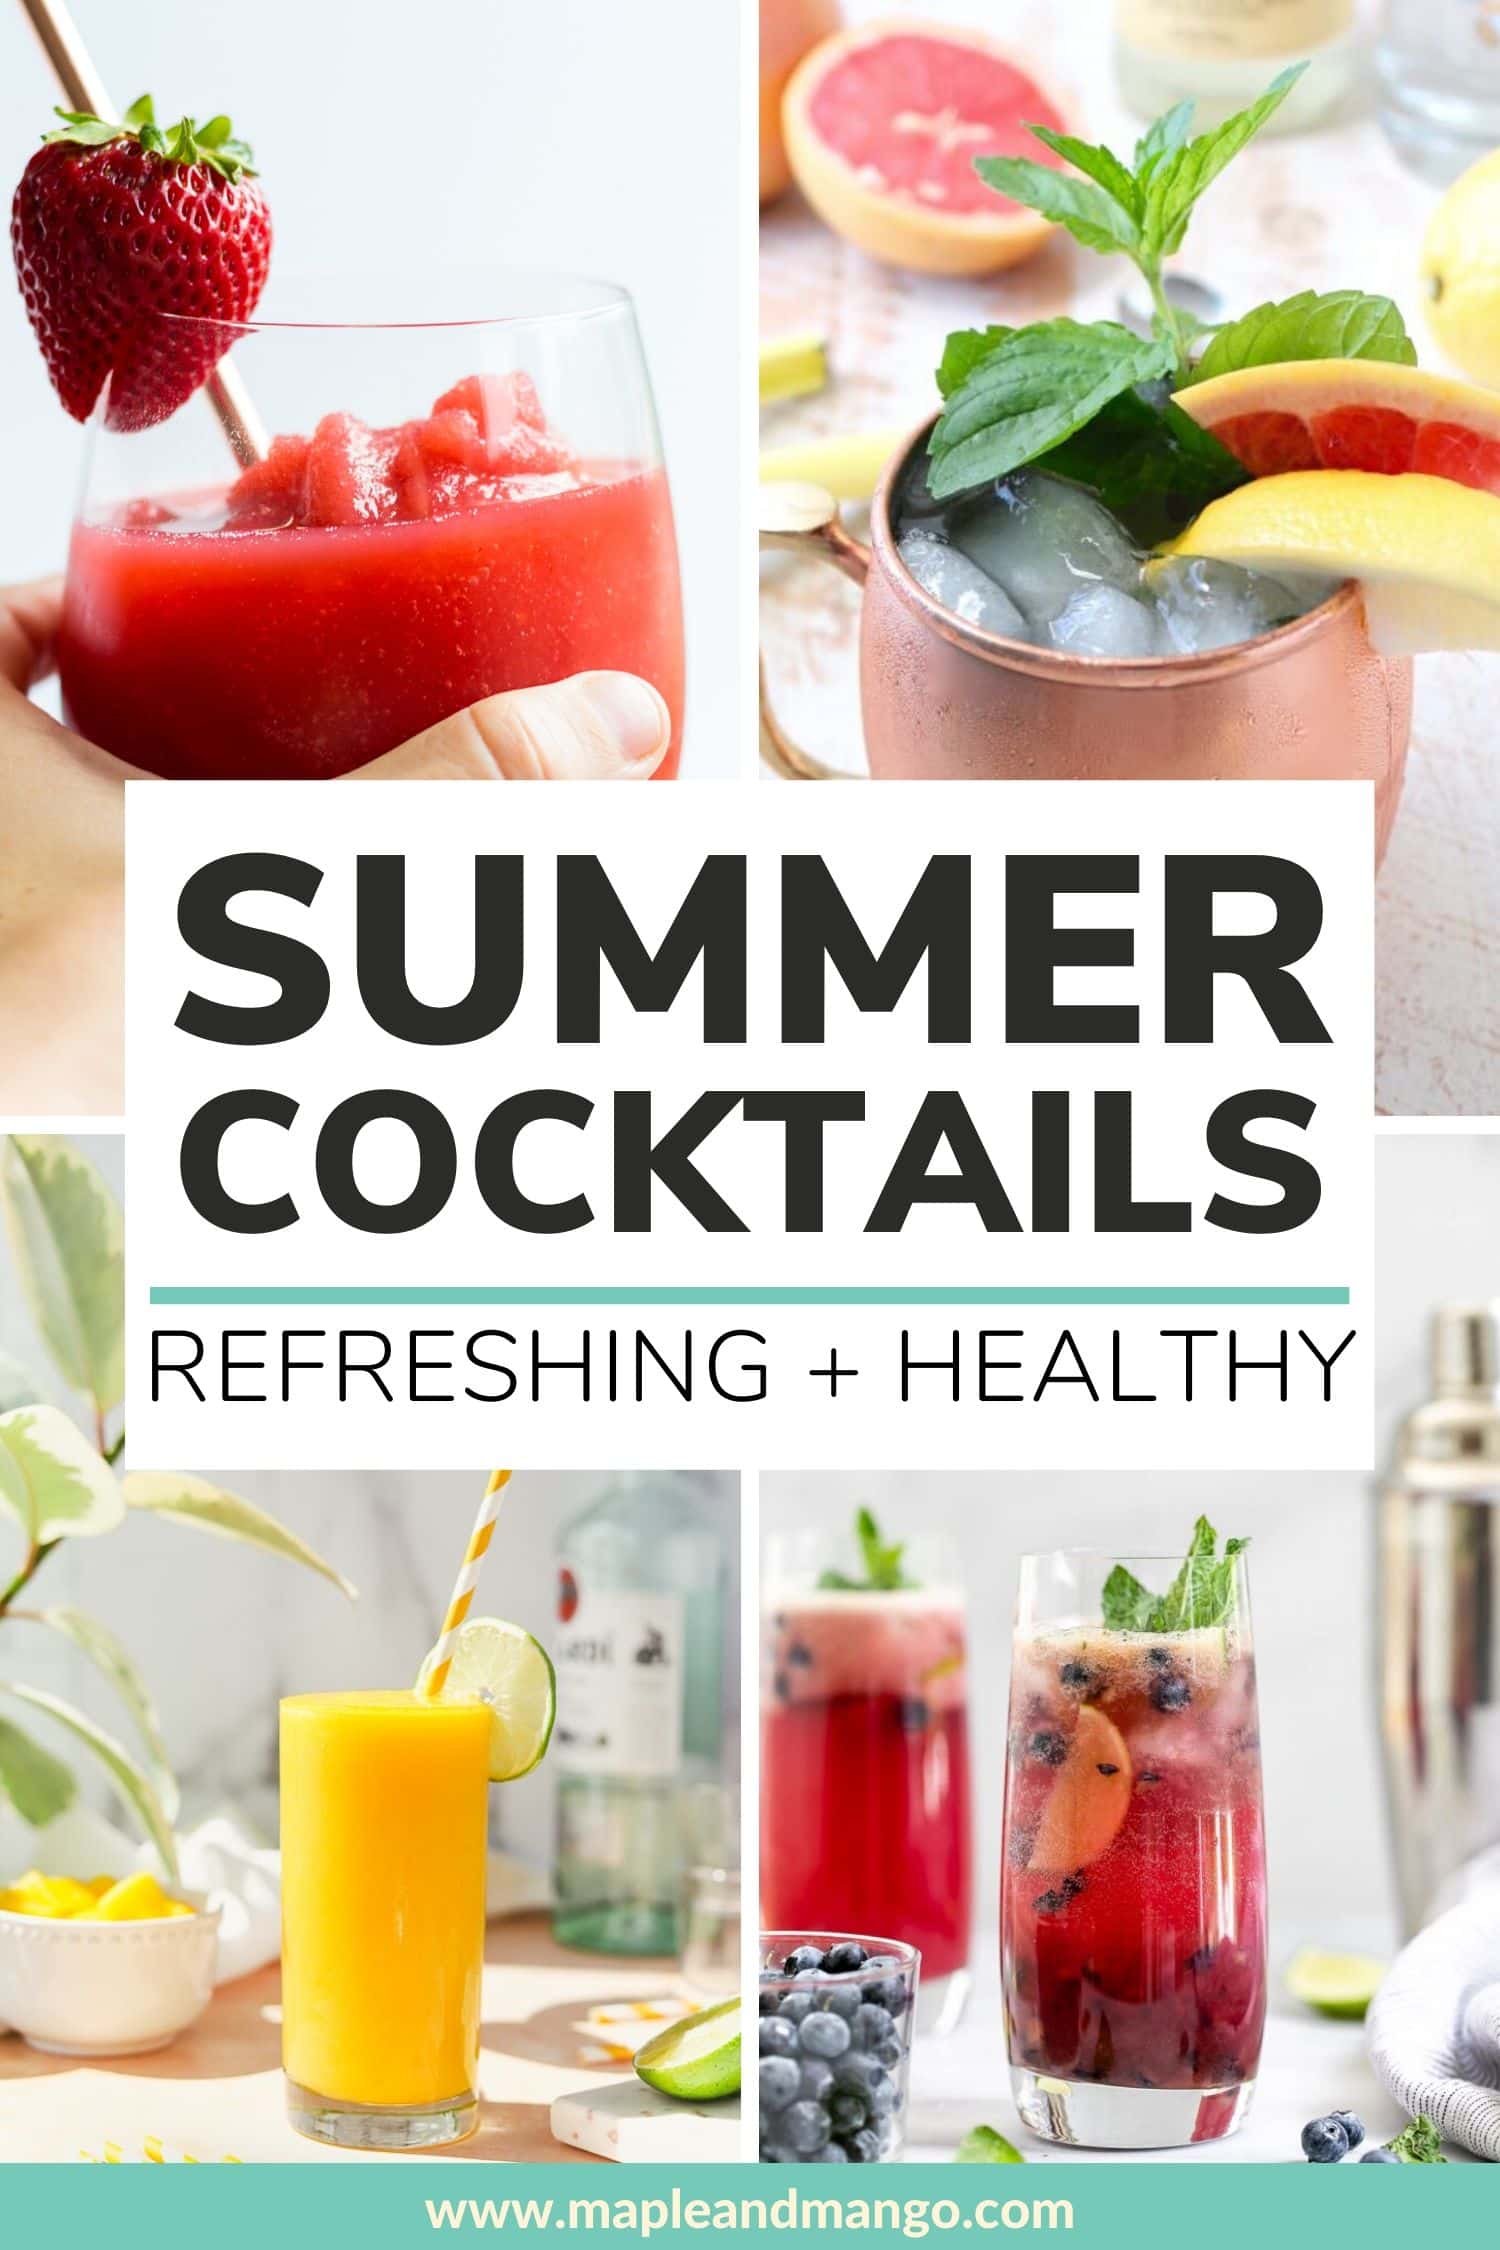 Collage of four cocktails with text overlay "Summer Cocktails - Refreshing + Healthy"